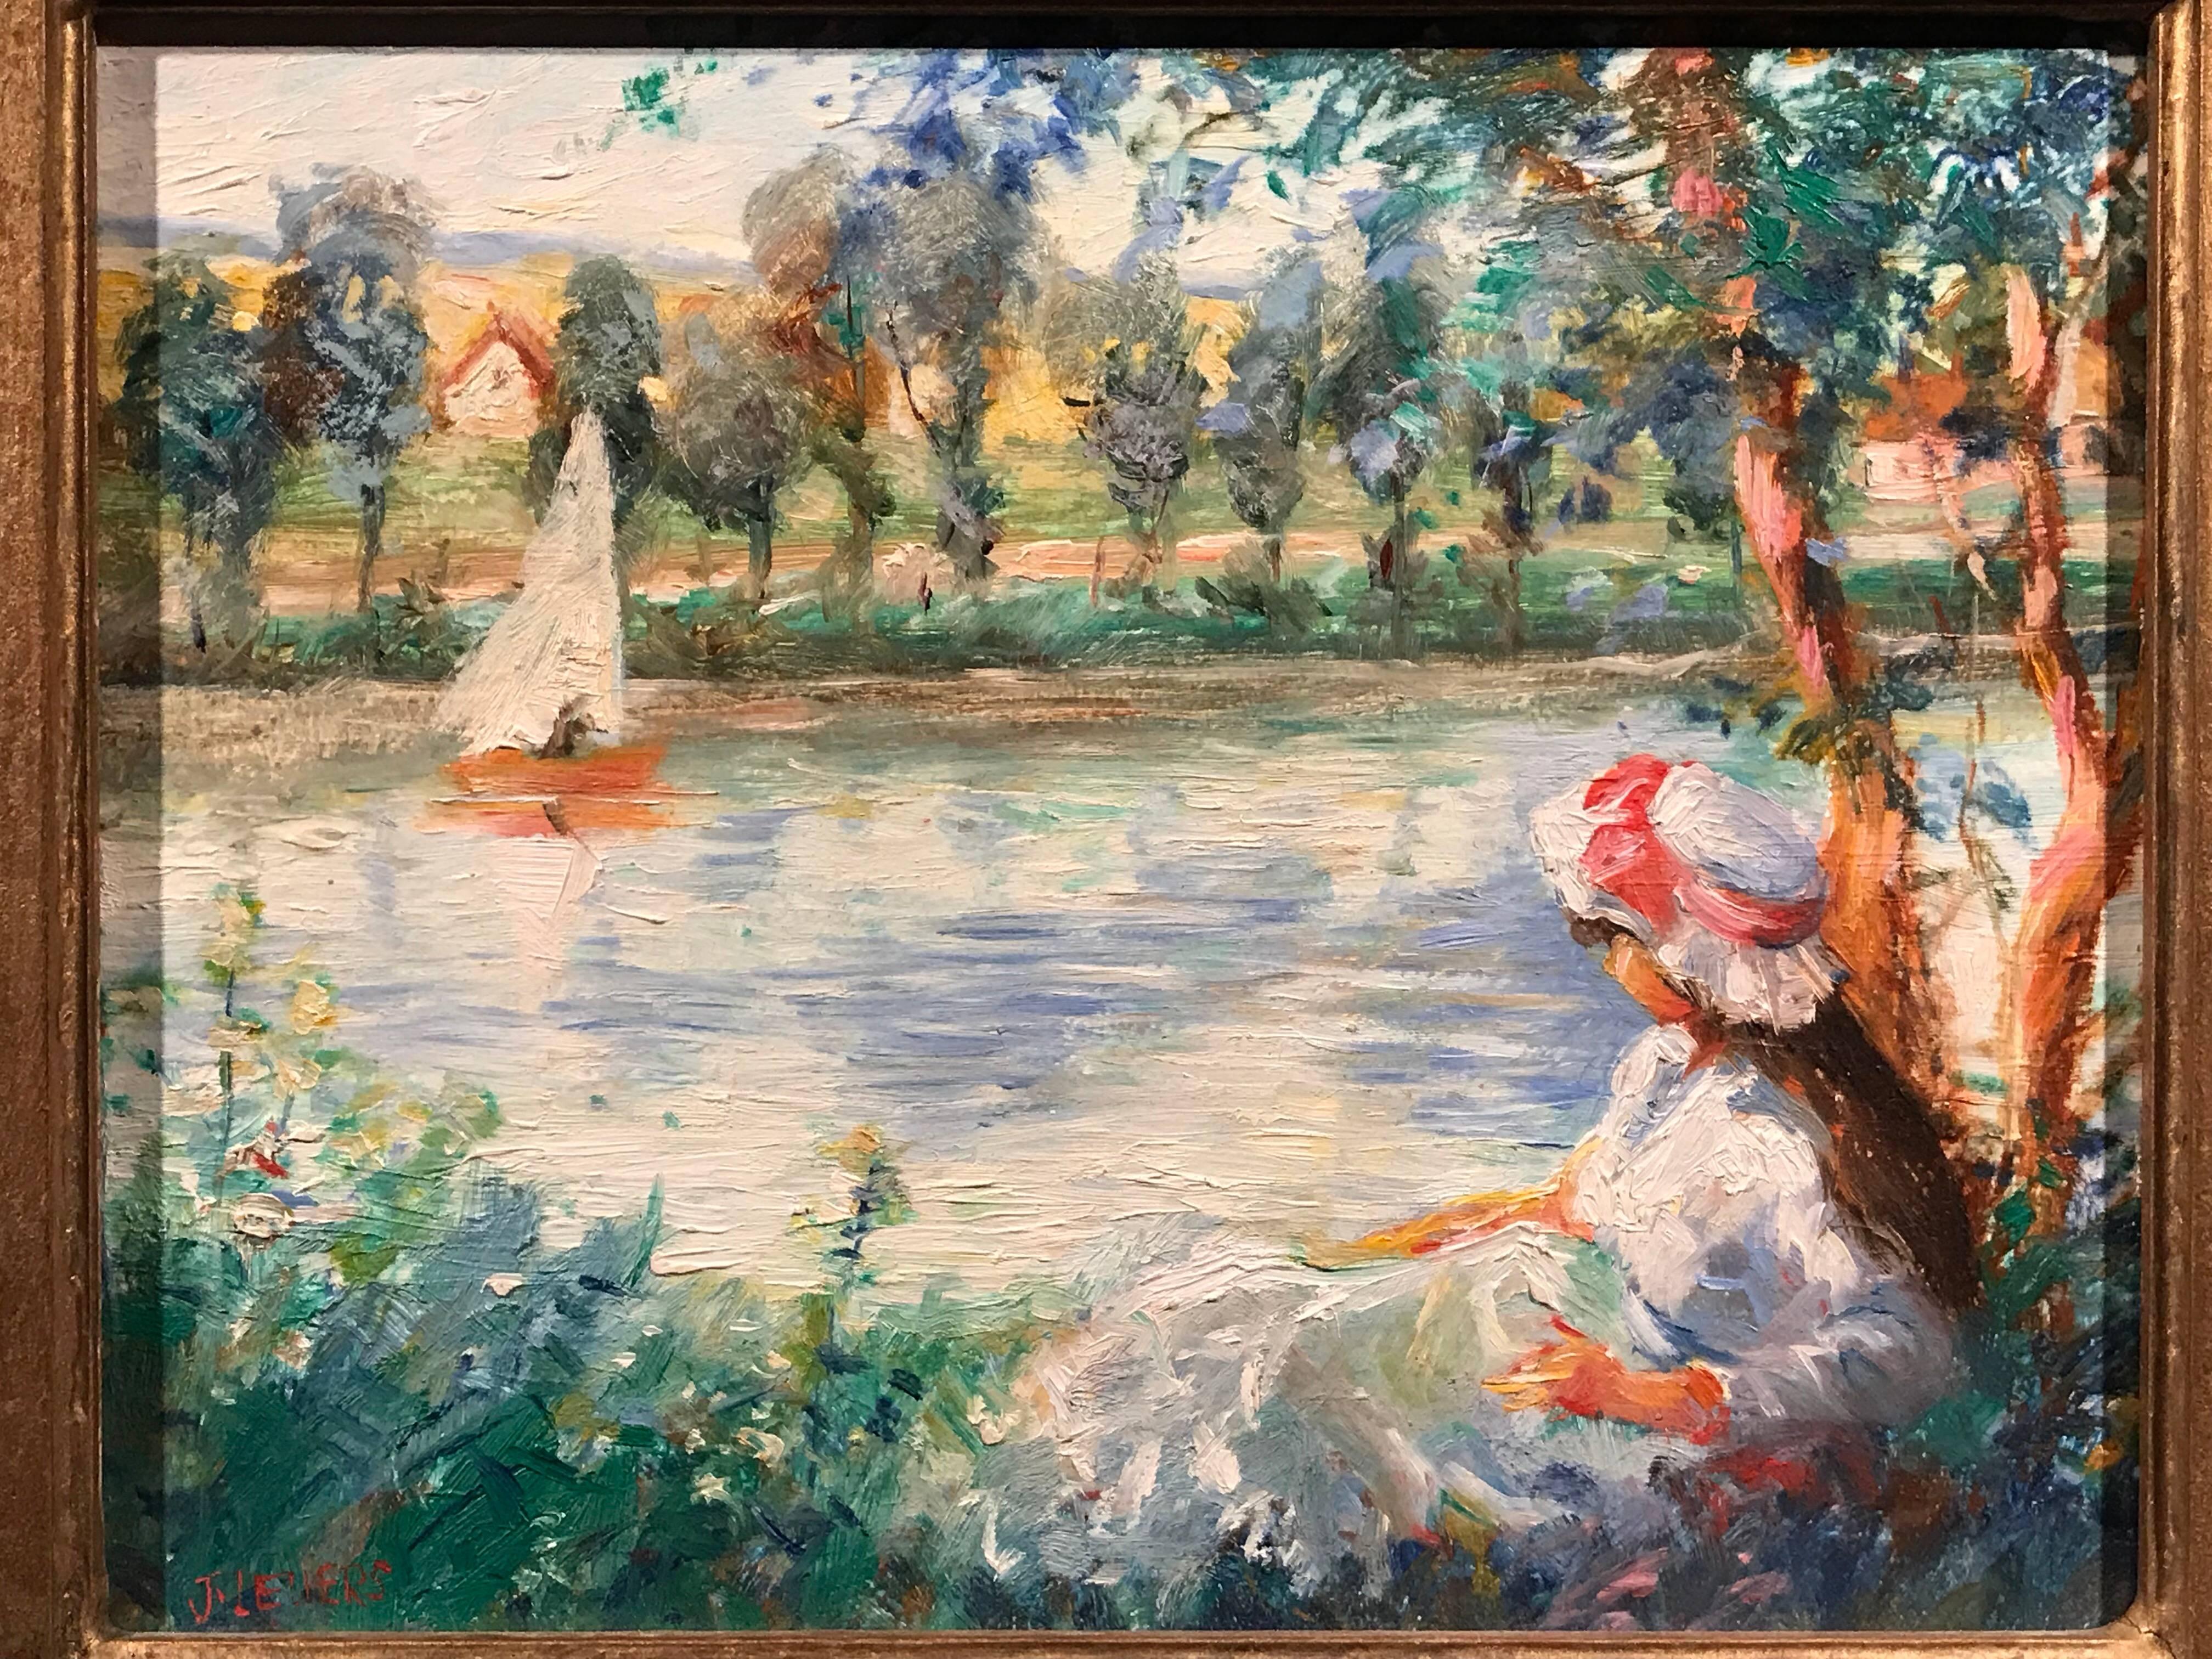 Superb French Impressionist signed oil painting by Jeanette Leuers (b.1942), painted in the traditional style of the earlier Impressionists - with significant influence from Renoir. 

Painted with delightfully bold brushwork and a lovely warm